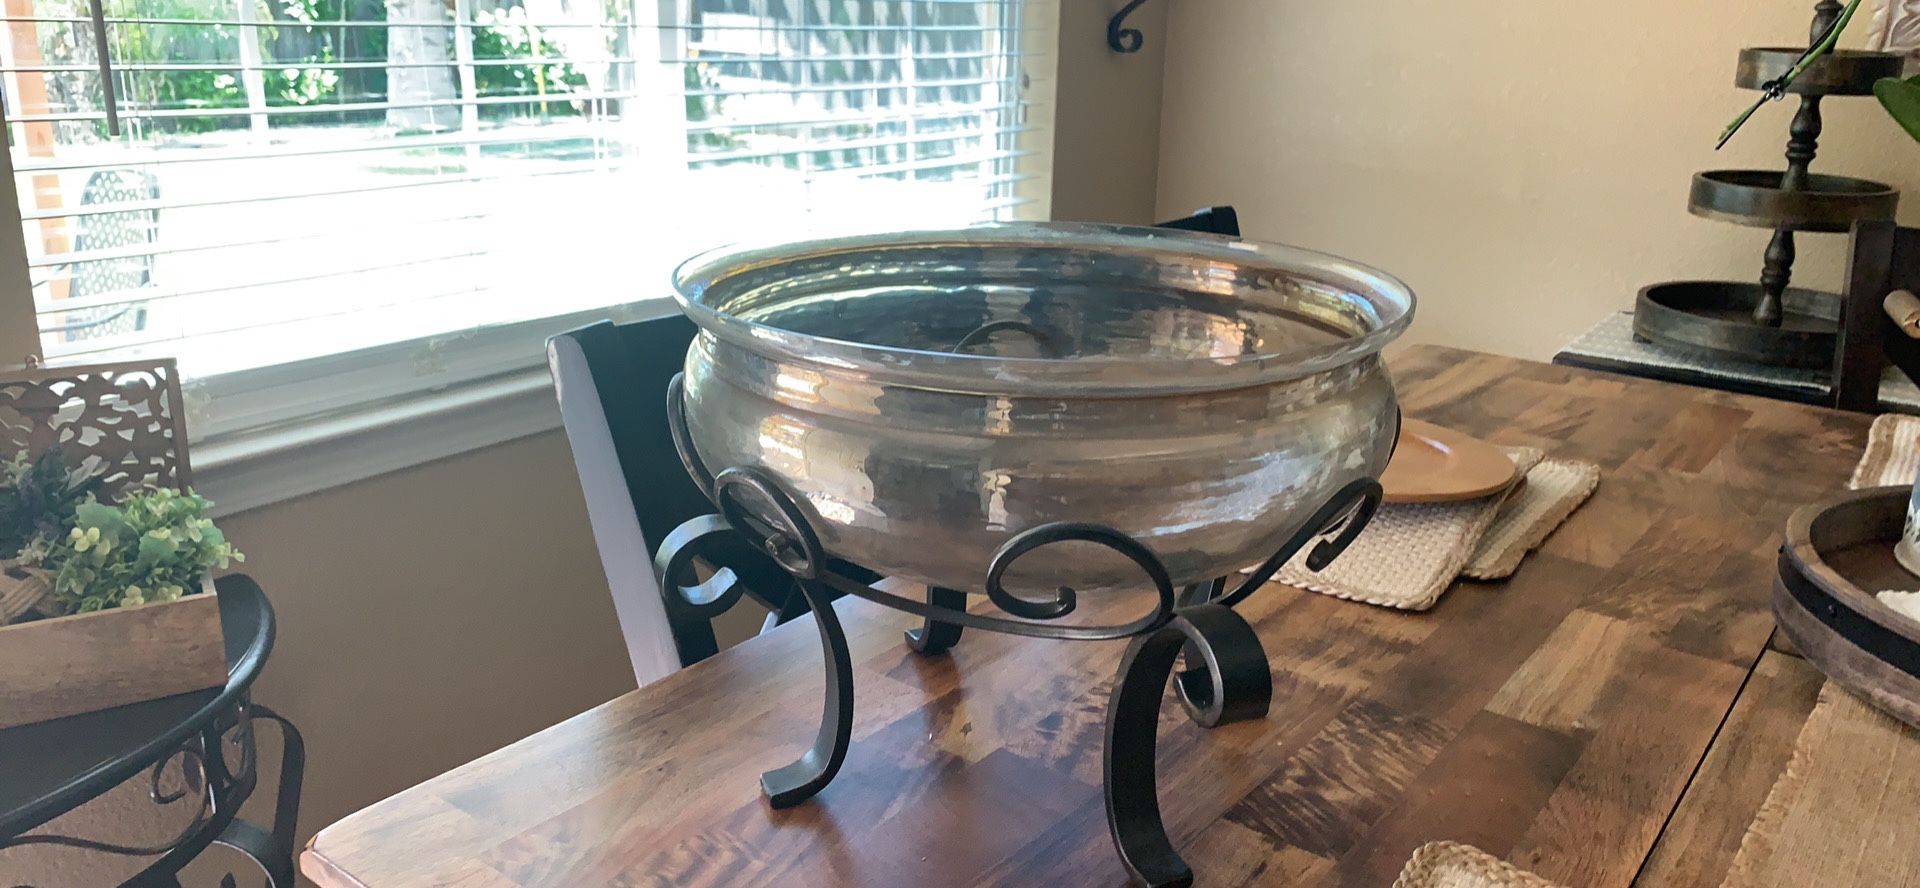  Bowl to decorate ( Pier  One )